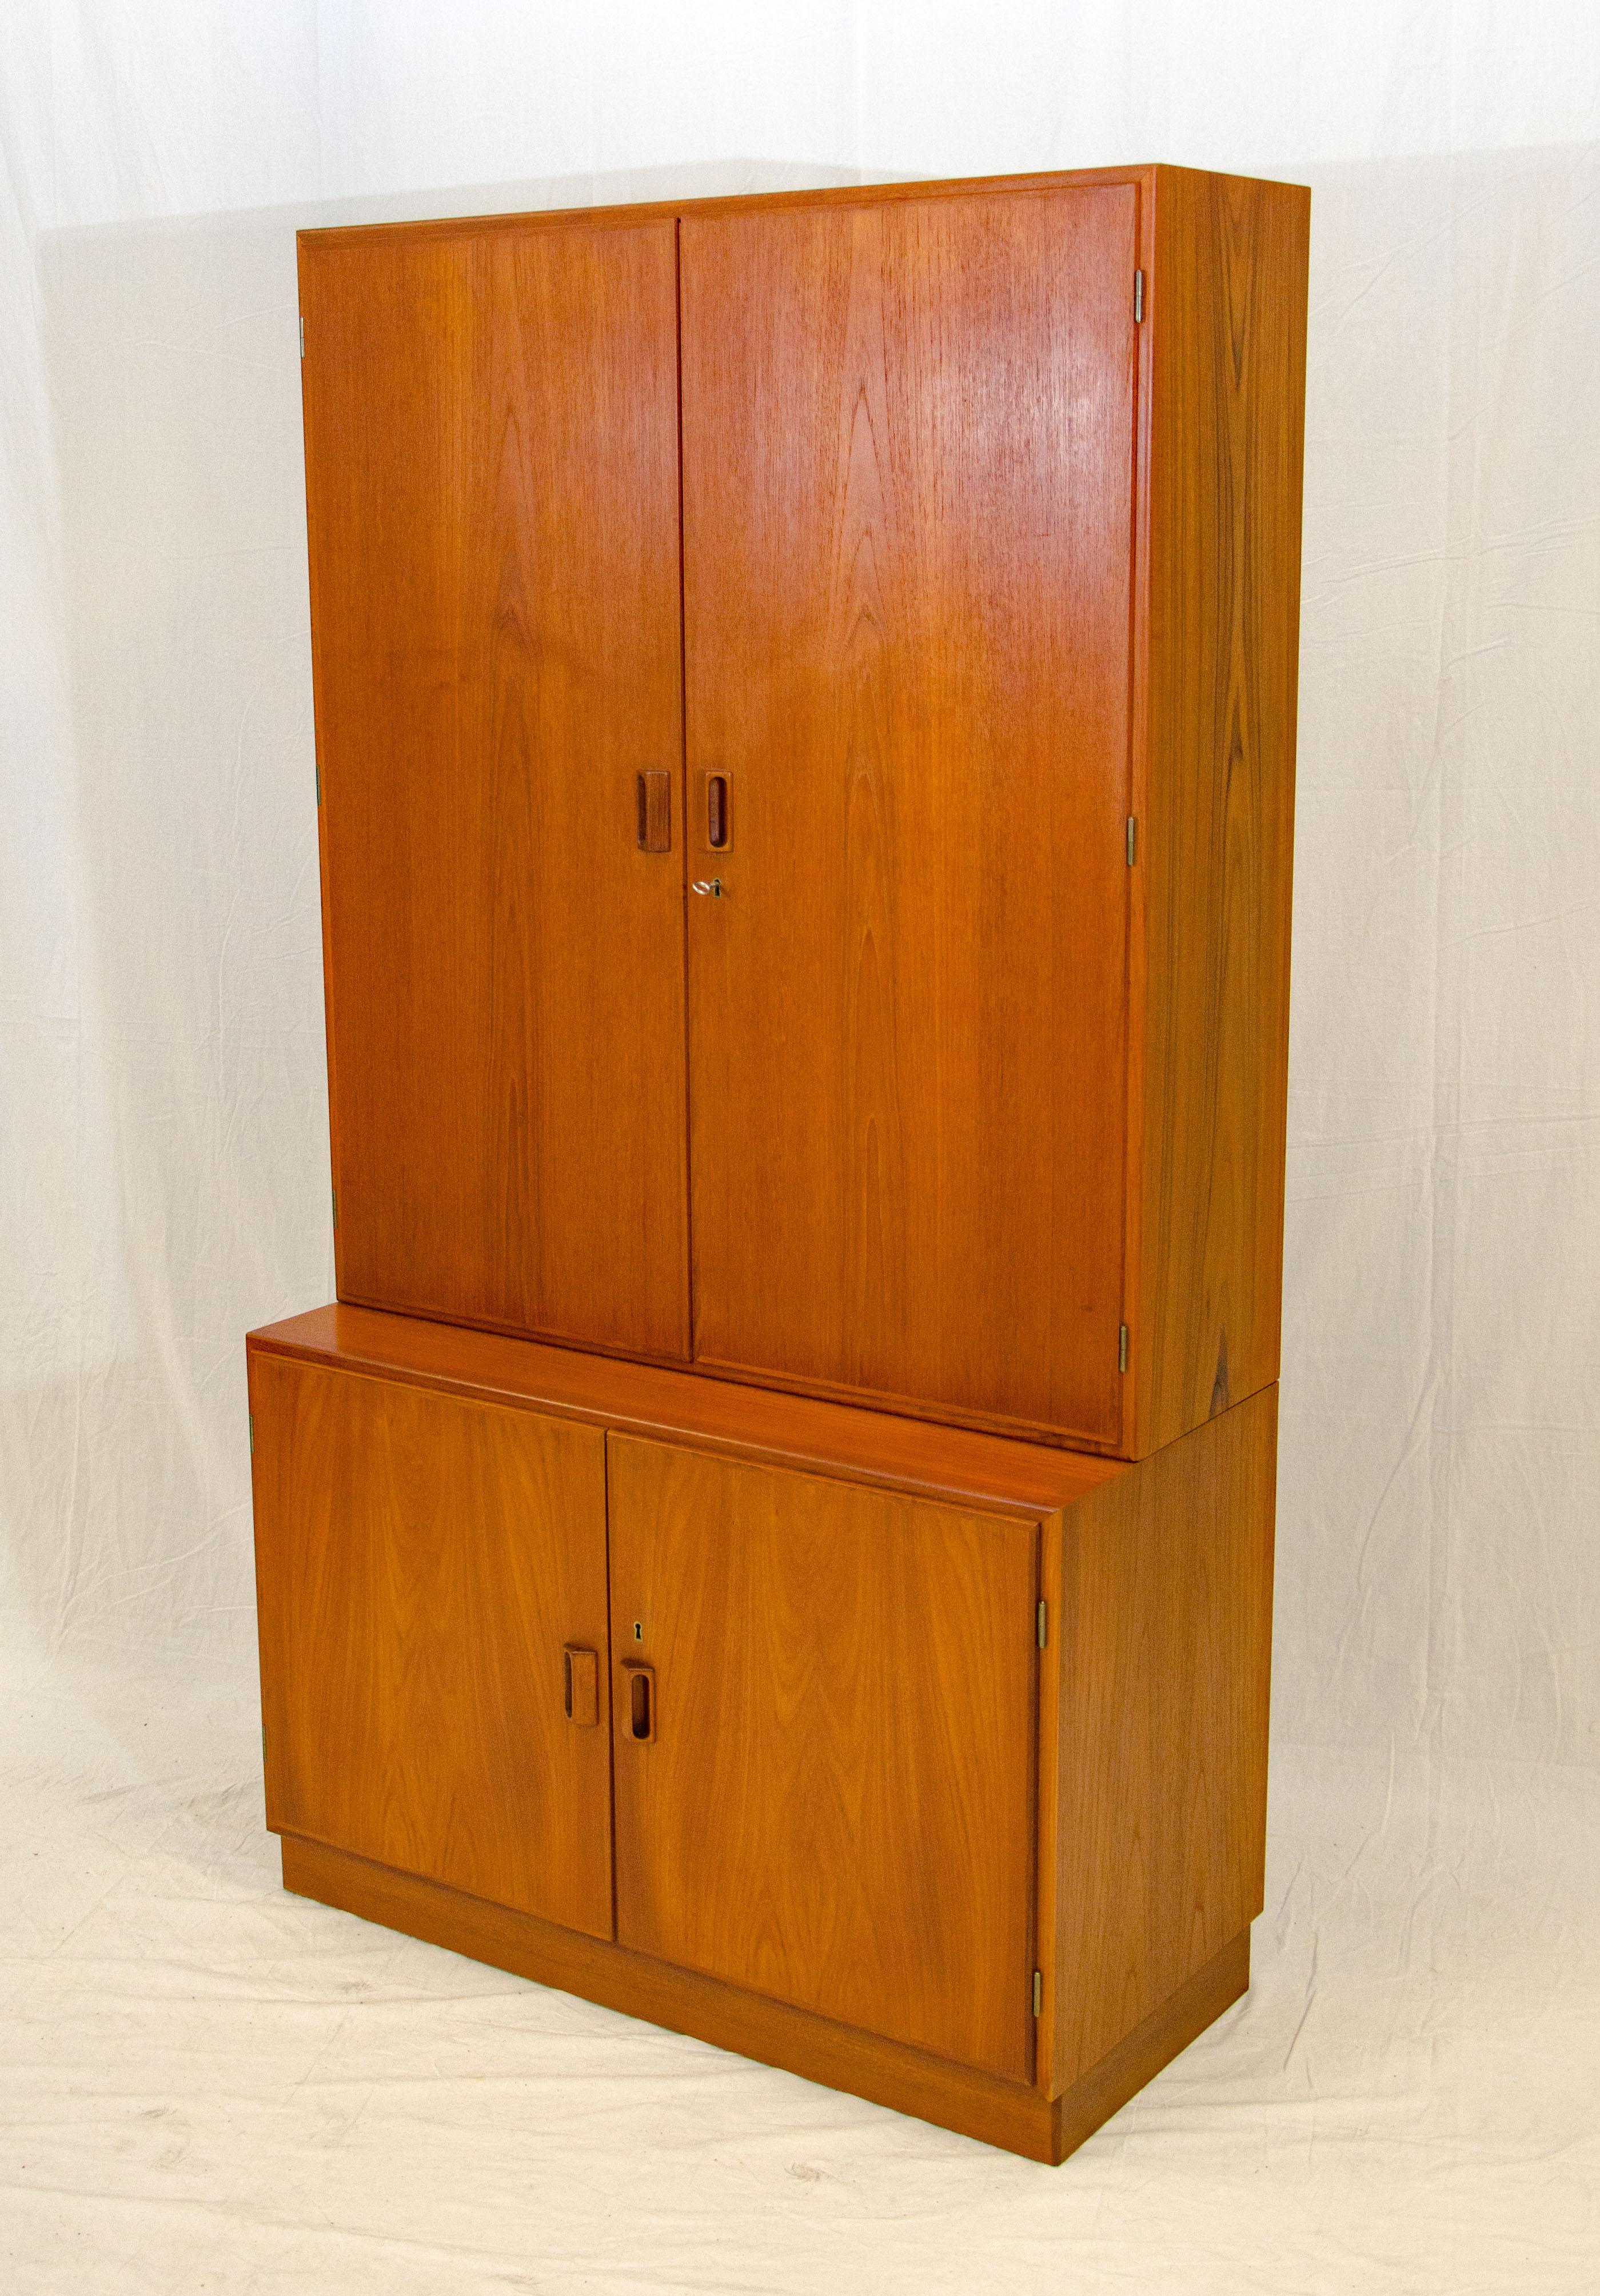 Multi-use Danish teak cabinet with lots of interior shelving, three adjustable shelves are shown but three more shelves are included for possible office, bedroom chifferobe or dresser storage. The shelves have a bevel on the bottom edge for a nice